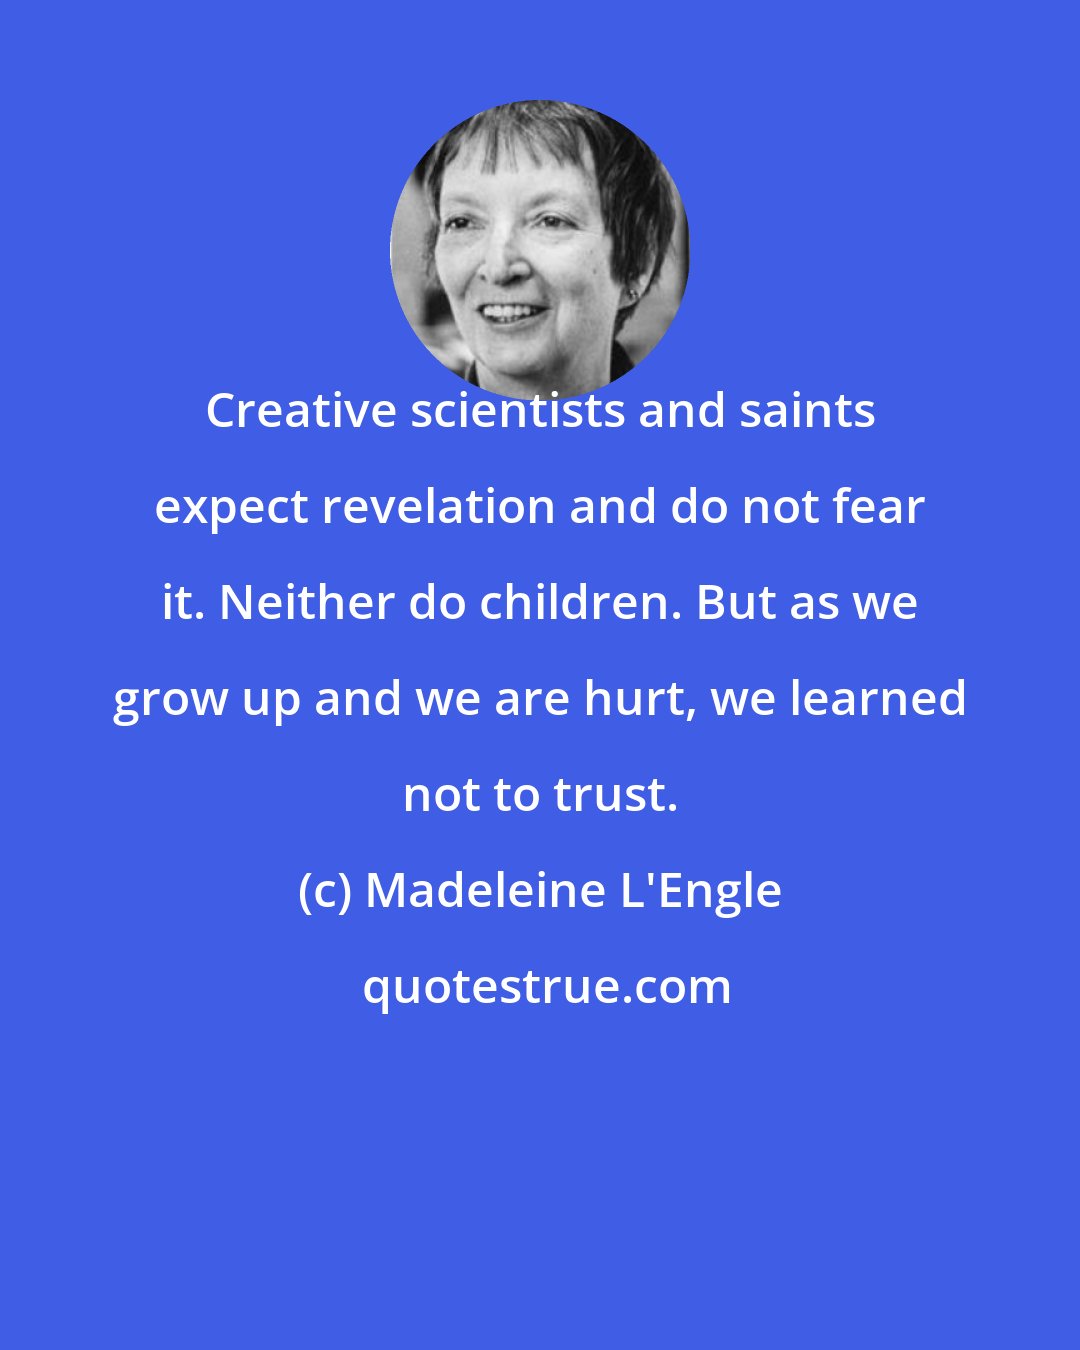 Madeleine L'Engle: Creative scientists and saints expect revelation and do not fear it. Neither do children. But as we grow up and we are hurt, we learned not to trust.